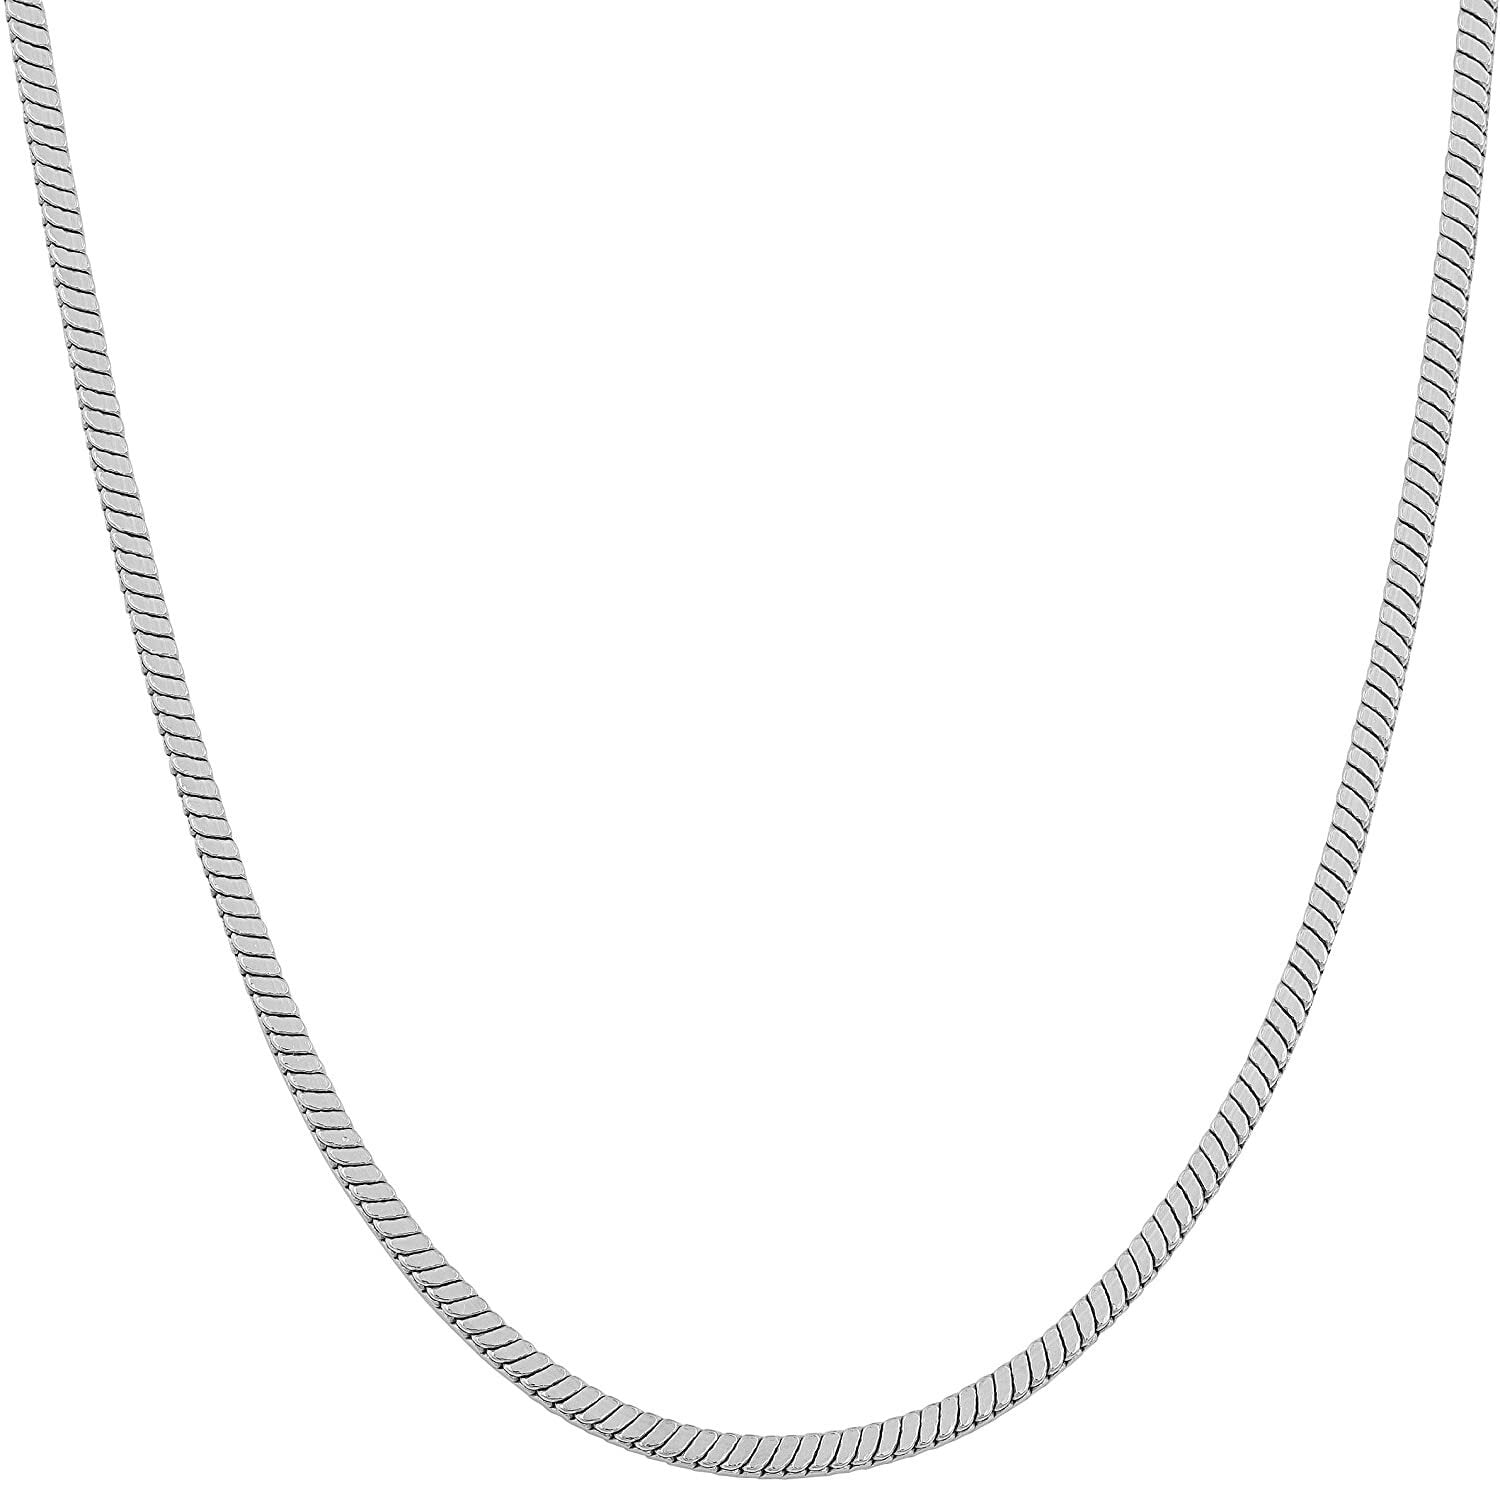 0.7MM Snake Square Diamond Cut Chain .925 Solid Sterling Silver Sizes "16-24"